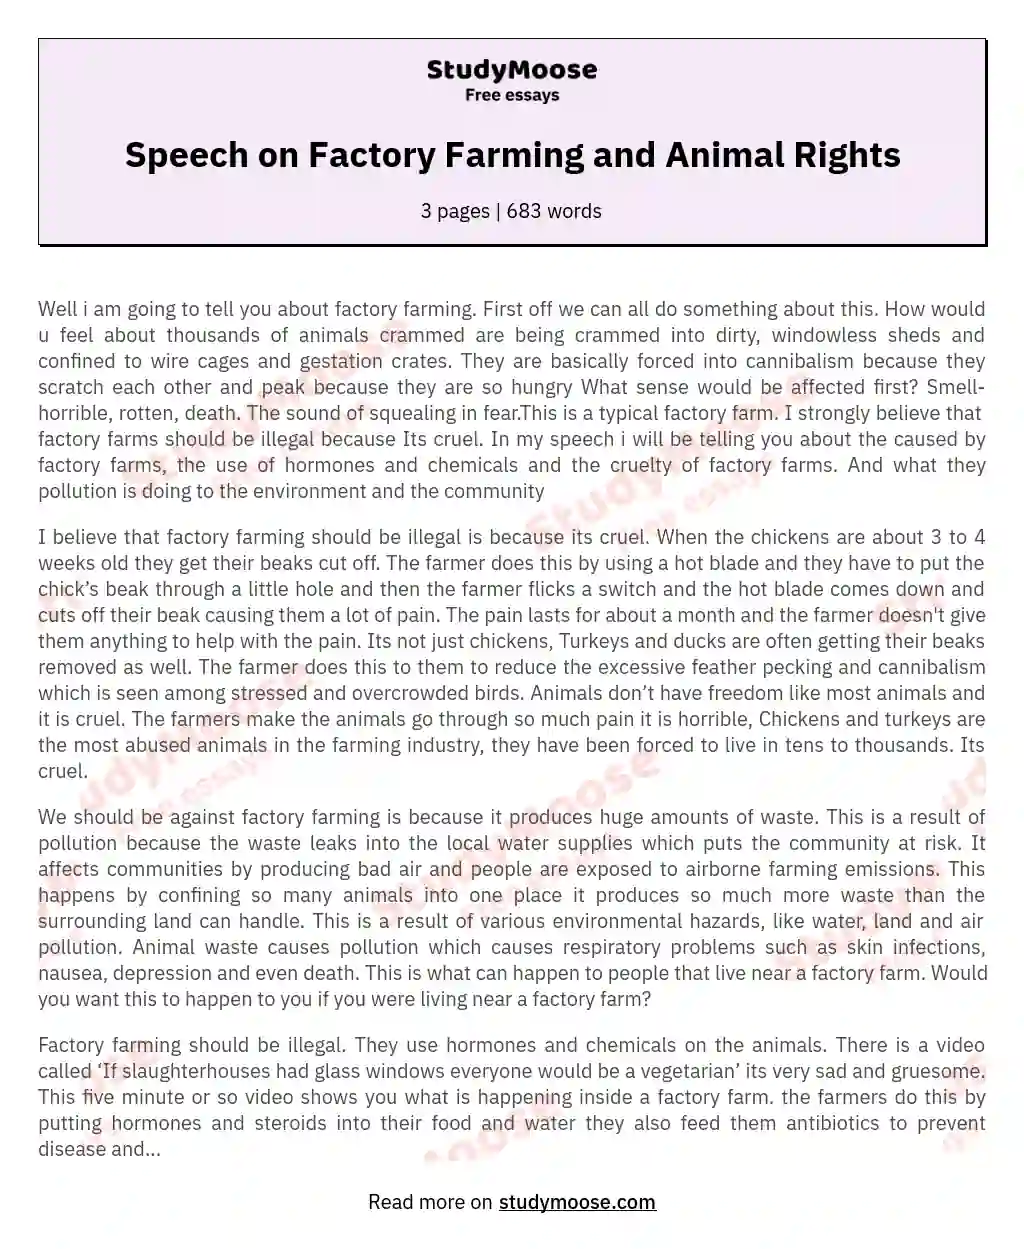 Speech on Factory Farming and Animal Rights Free Essay Example